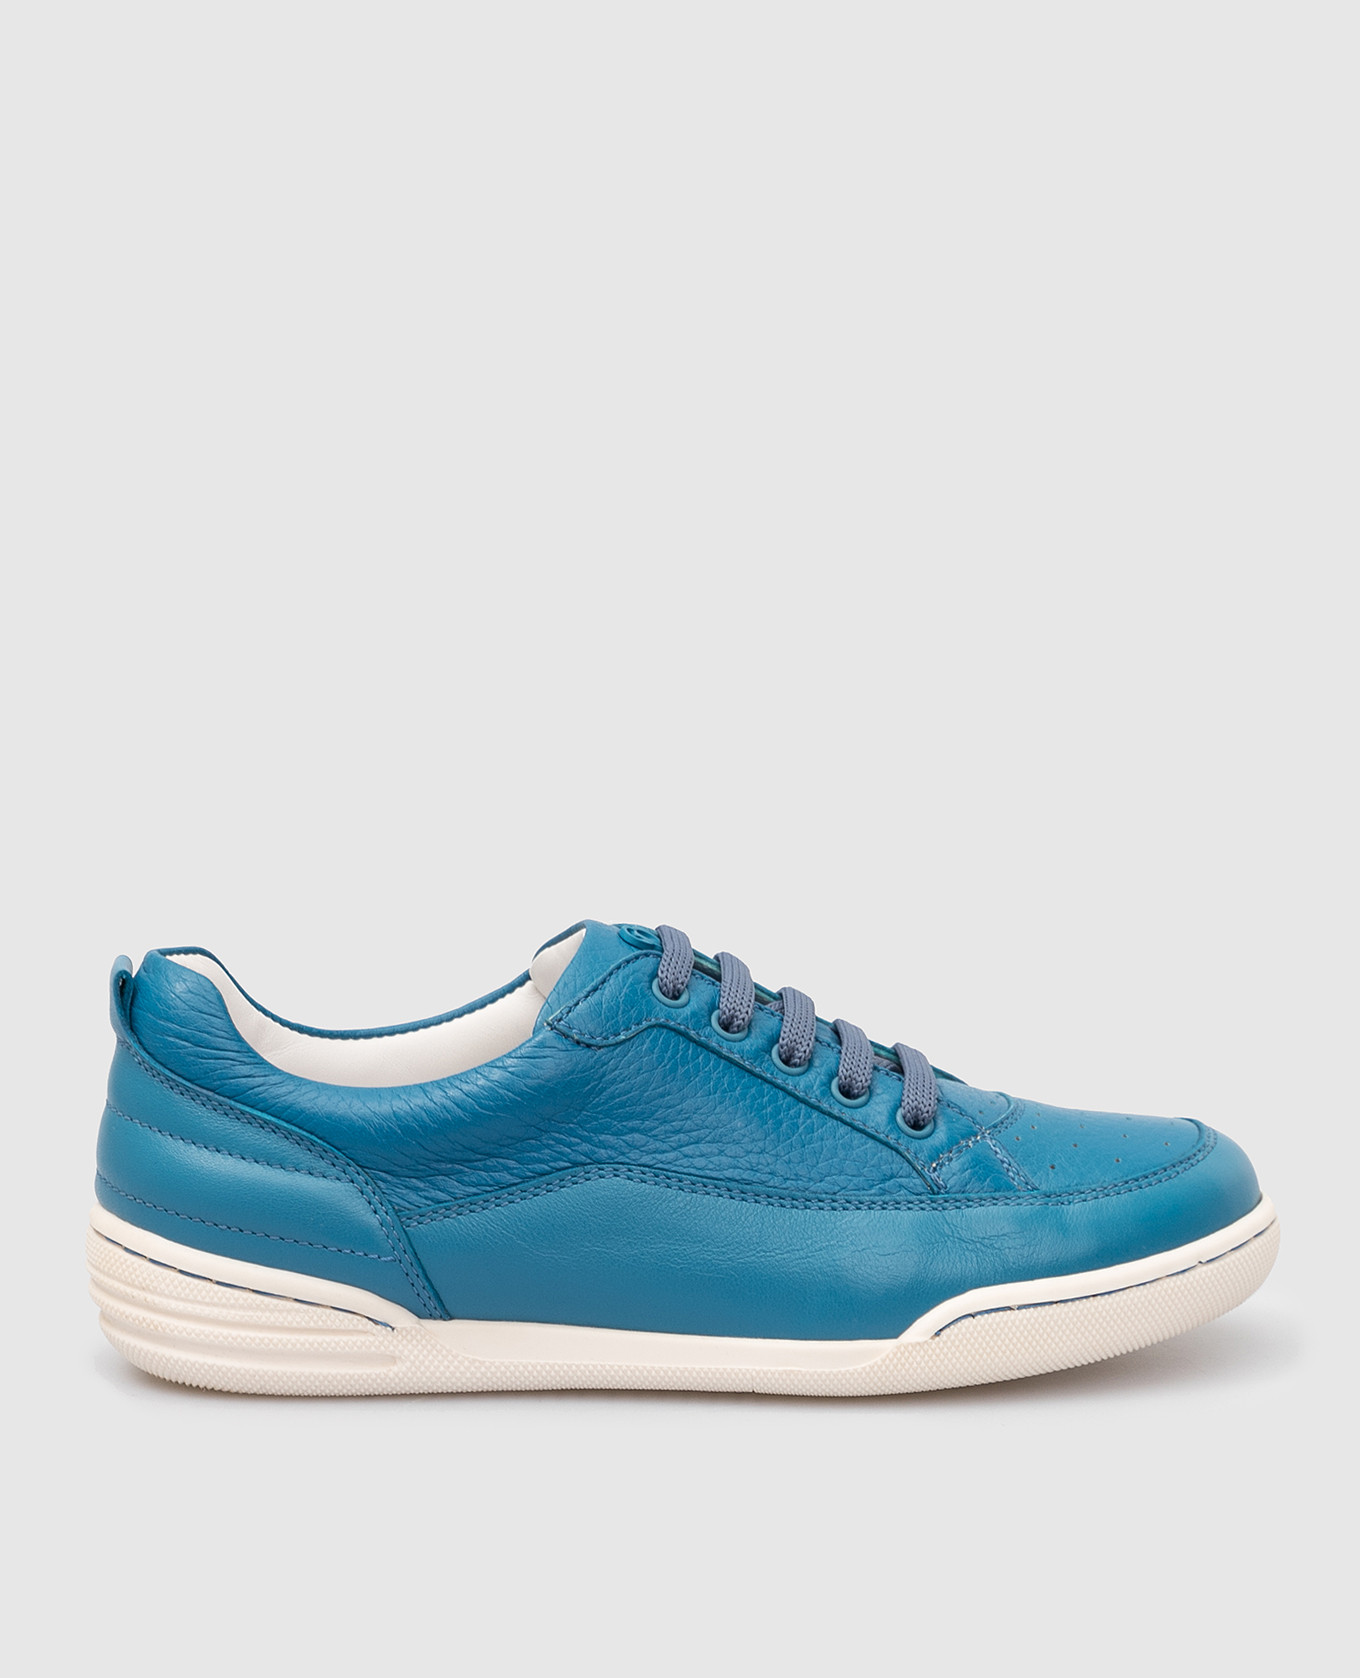 Children's turquoise leather sneakers